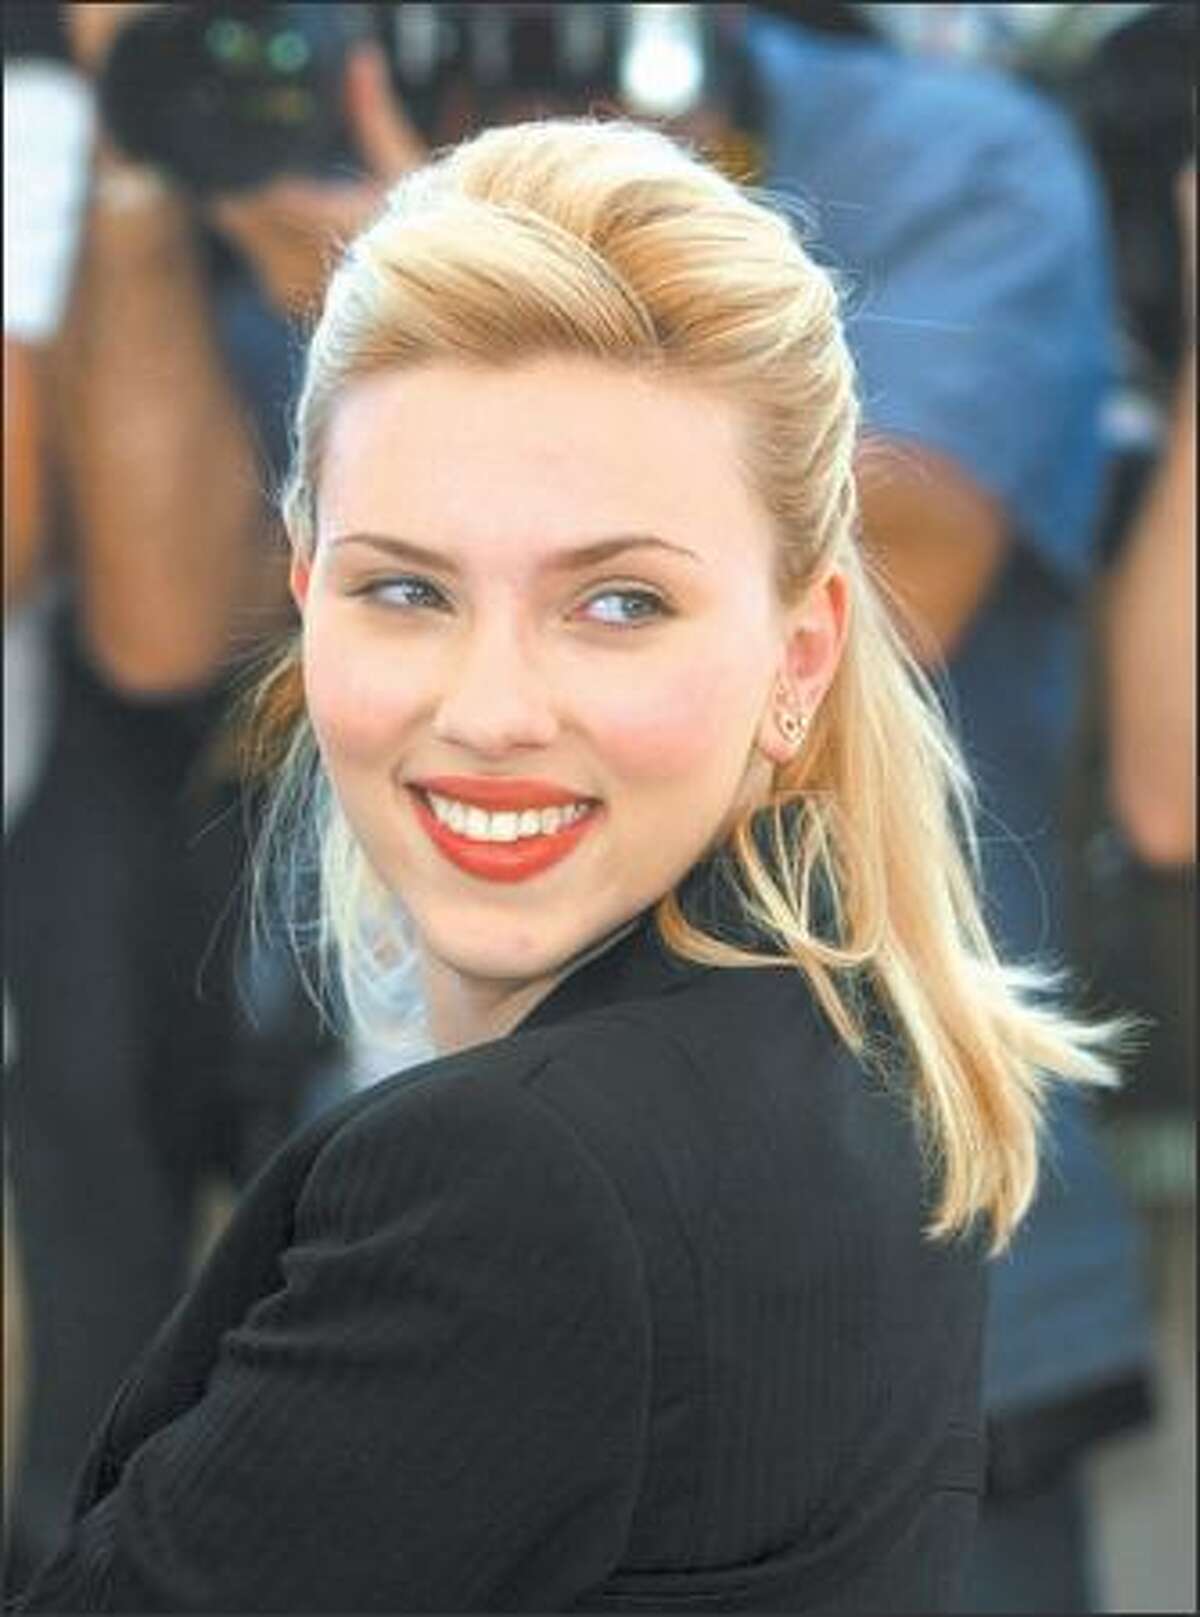 Scarlett Johansson is fine in body, if not spirit, after a collision Thursday in a Disneyland parking lot. She and two friends were being tailed by paparazzi when Johansson swerved, clipping a car carrying a woman and two kids. Her rep said the frustrated star hopes lawmakers crack down on aggressive photo hounds.